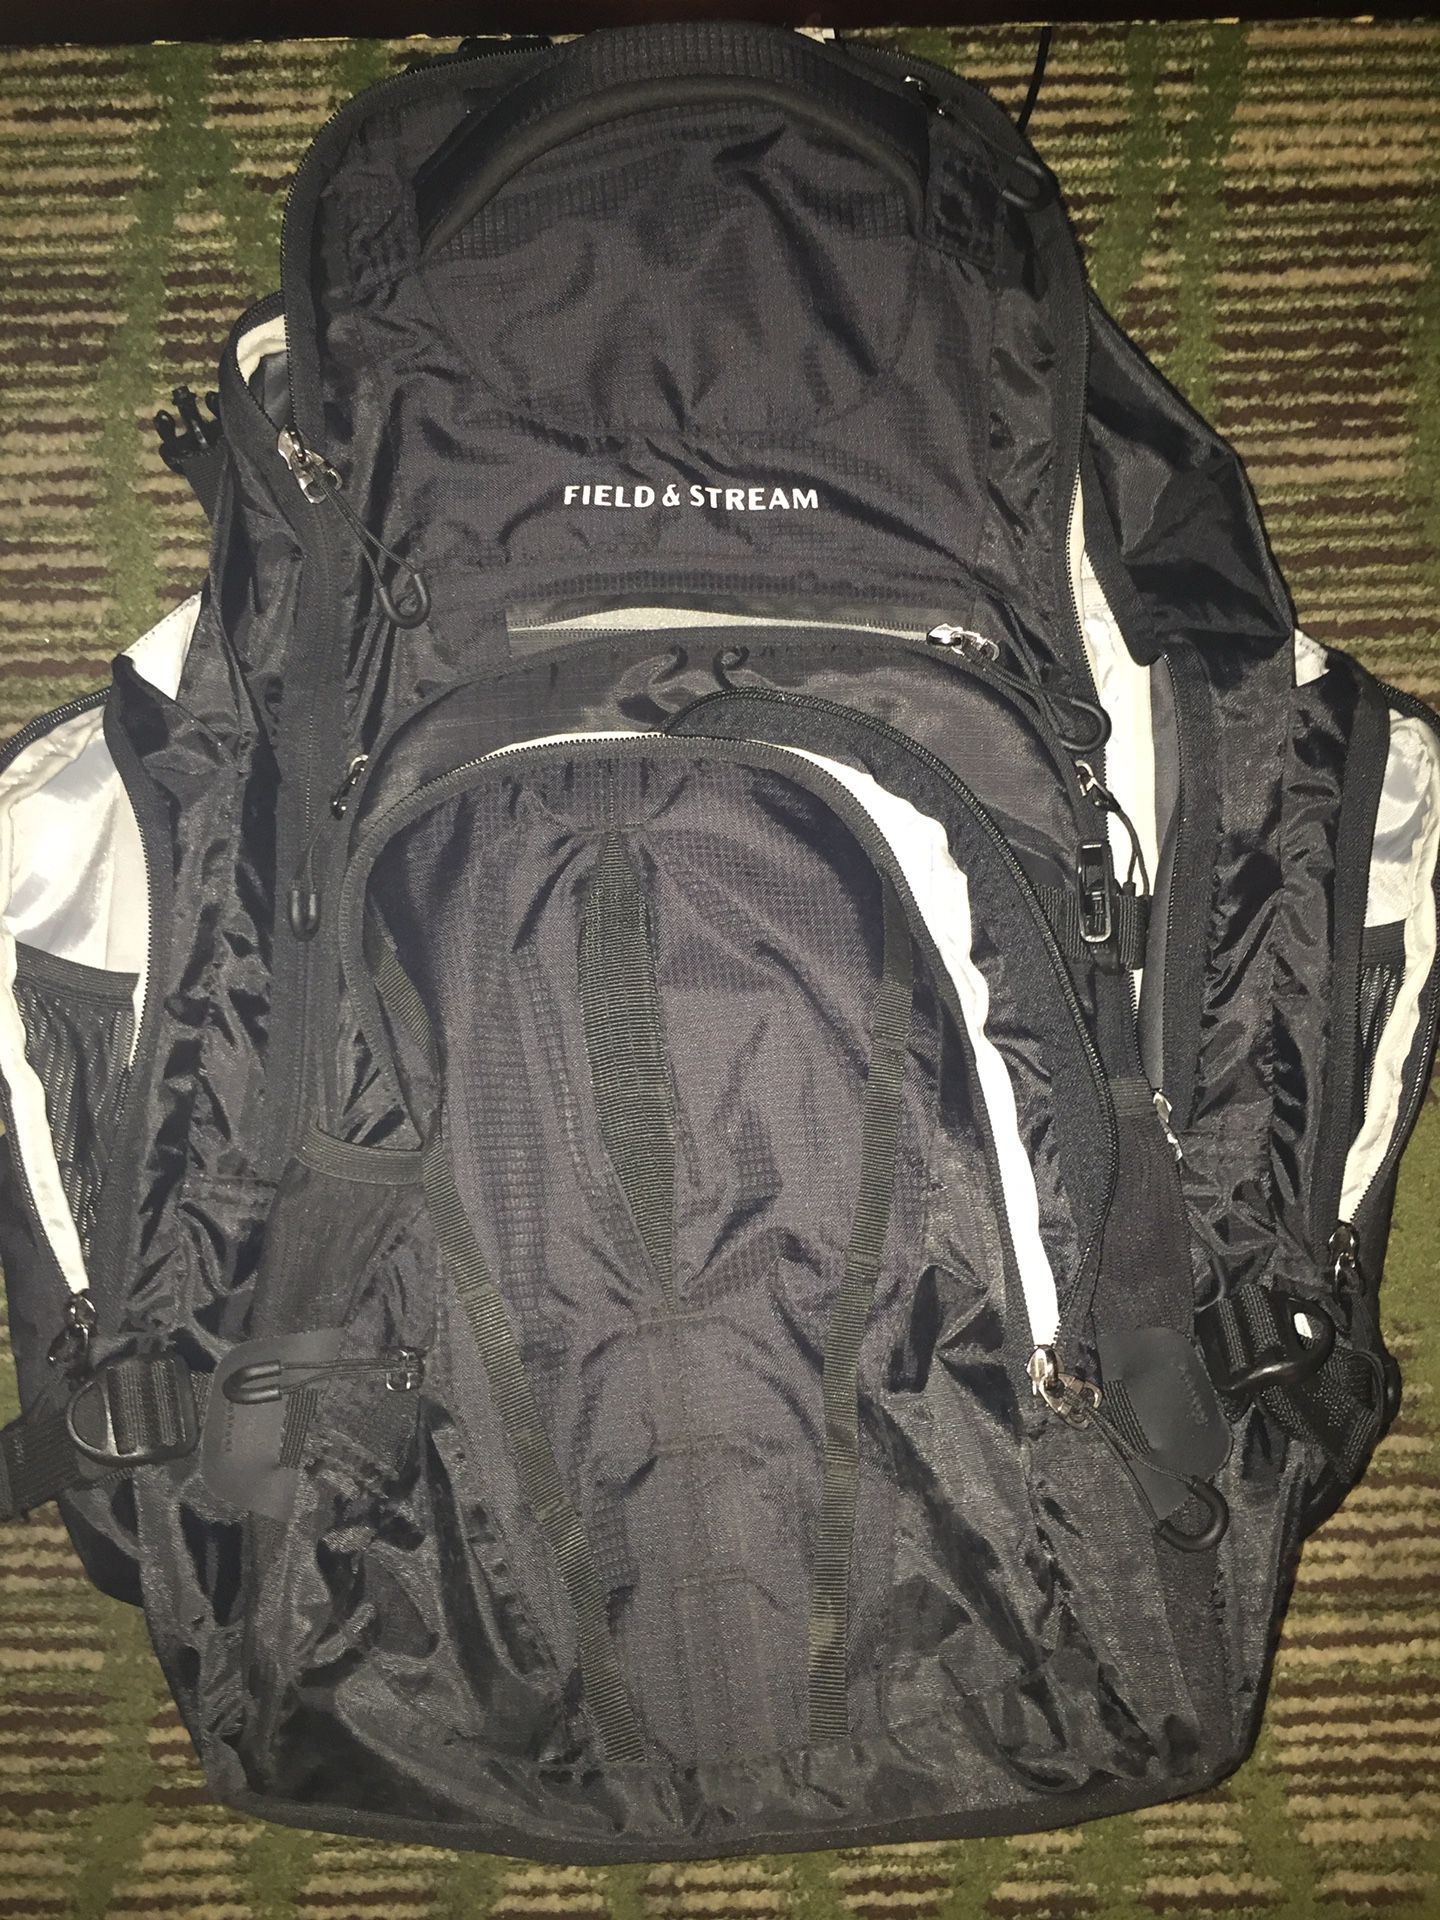 Brand New Field and Stream Backpack w/ one year warranty